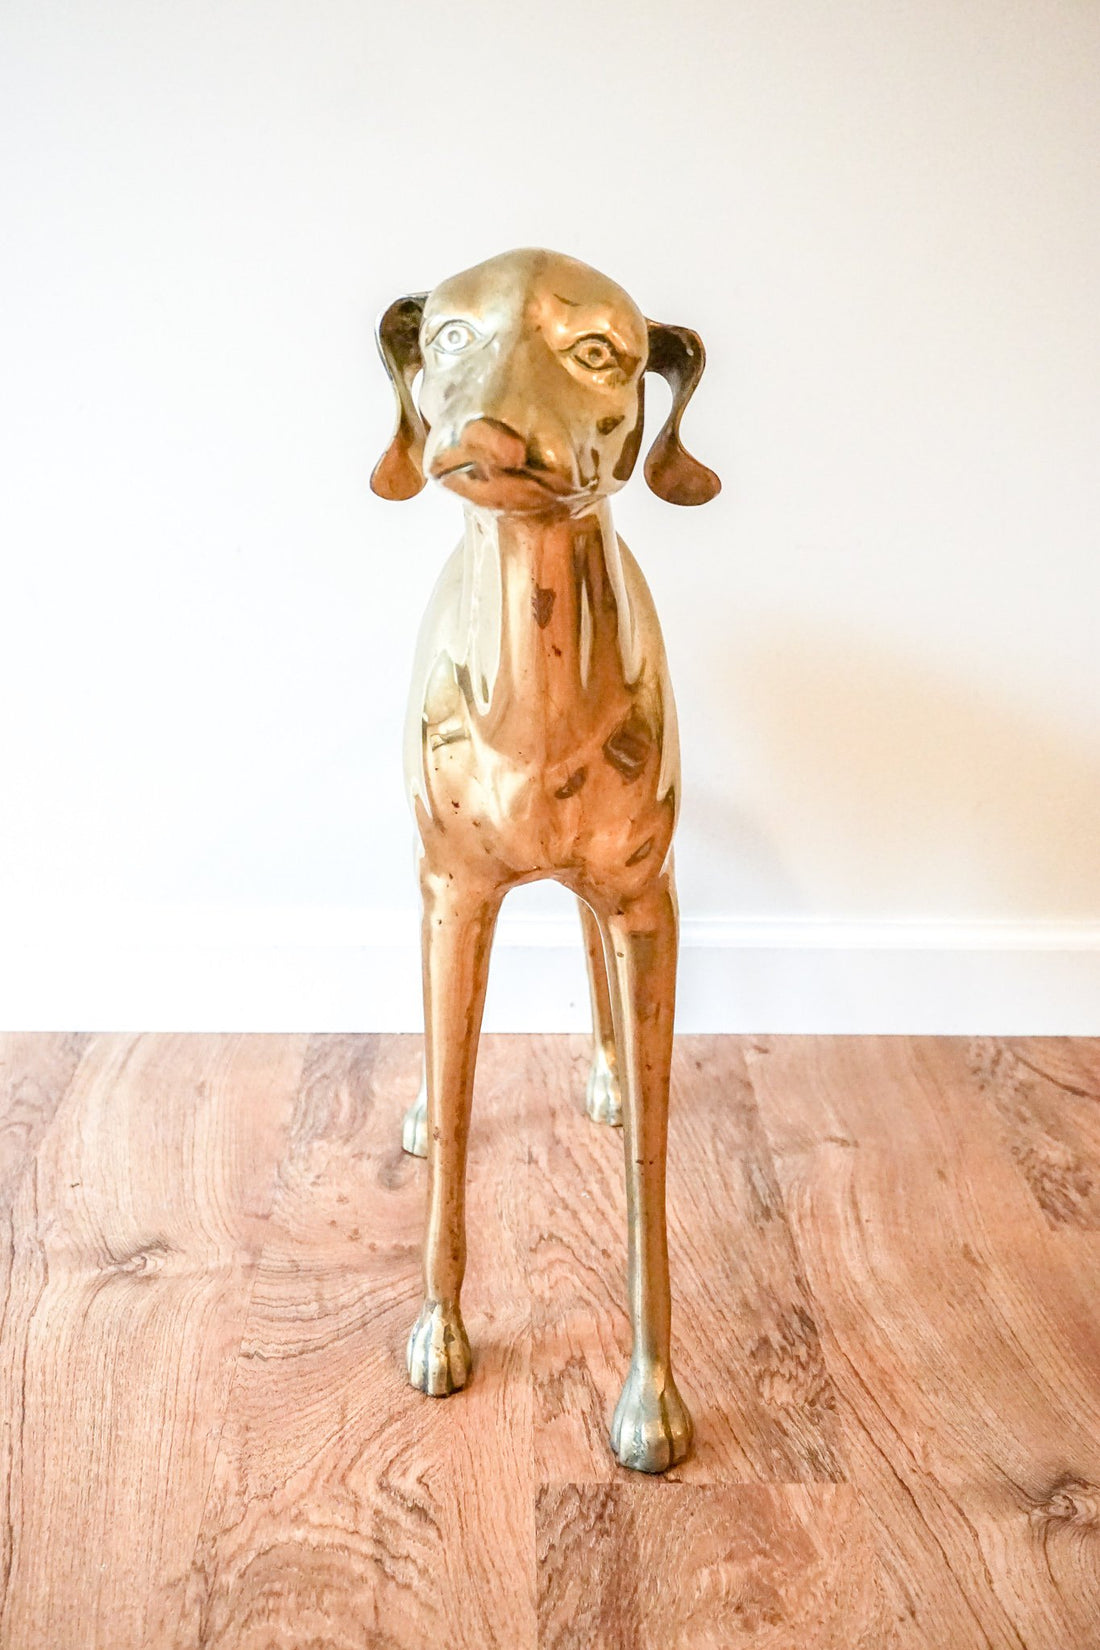 Adorable Mid-Century Extra Large Solid Brass Italian Greyhound